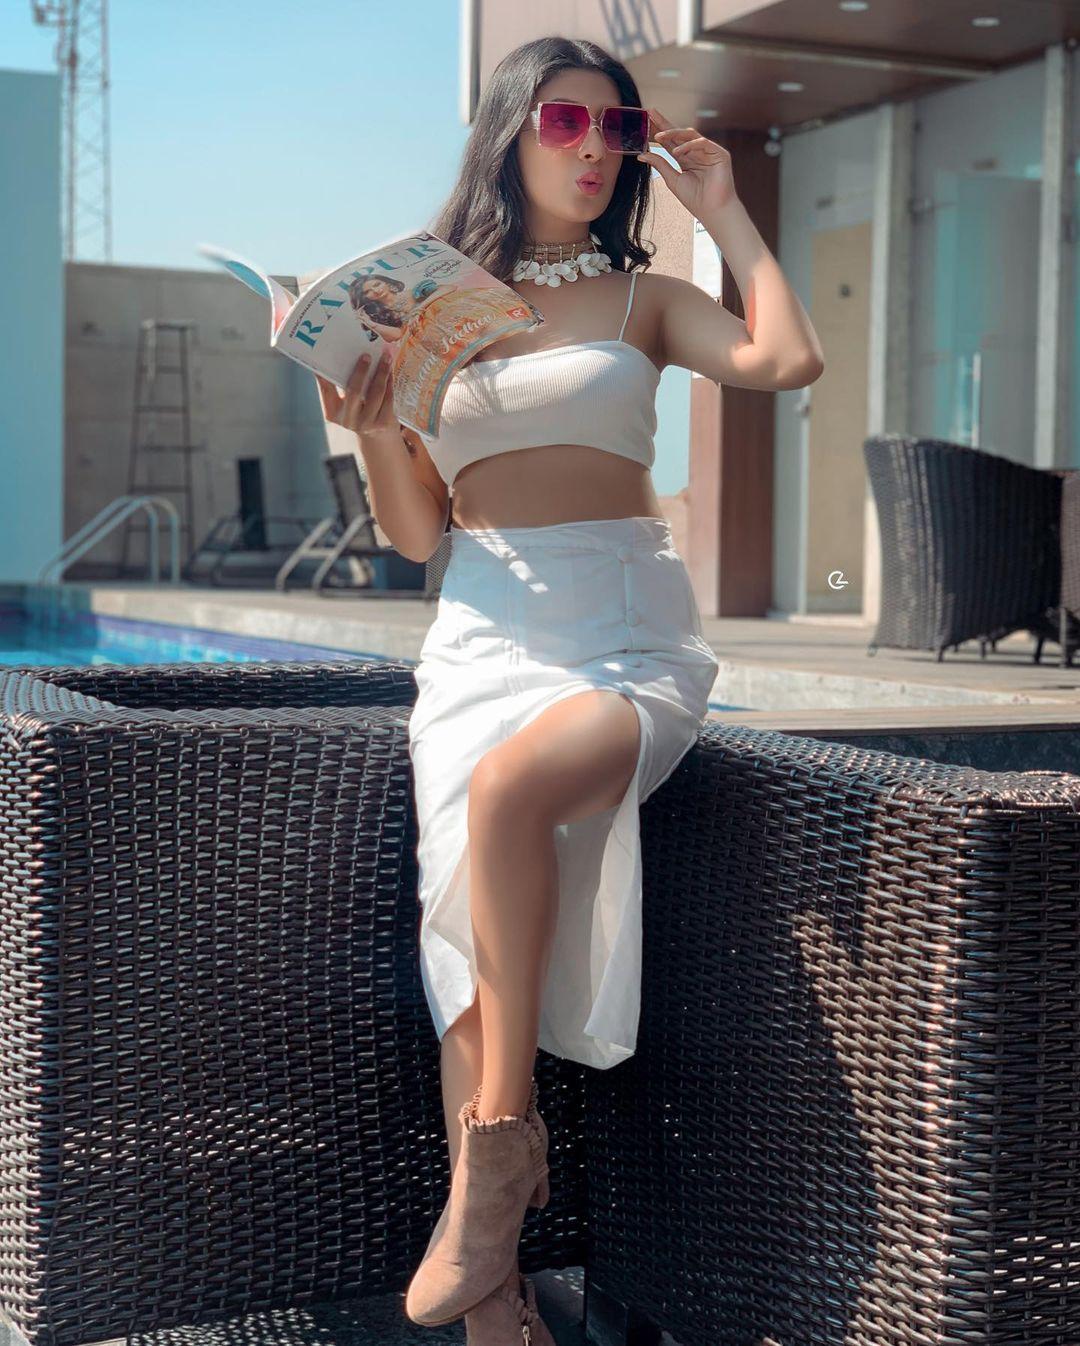 Besties cocktail at the poolside and confused about what to wear, which is subtle yet sexy? Then go for this pretty white coord set